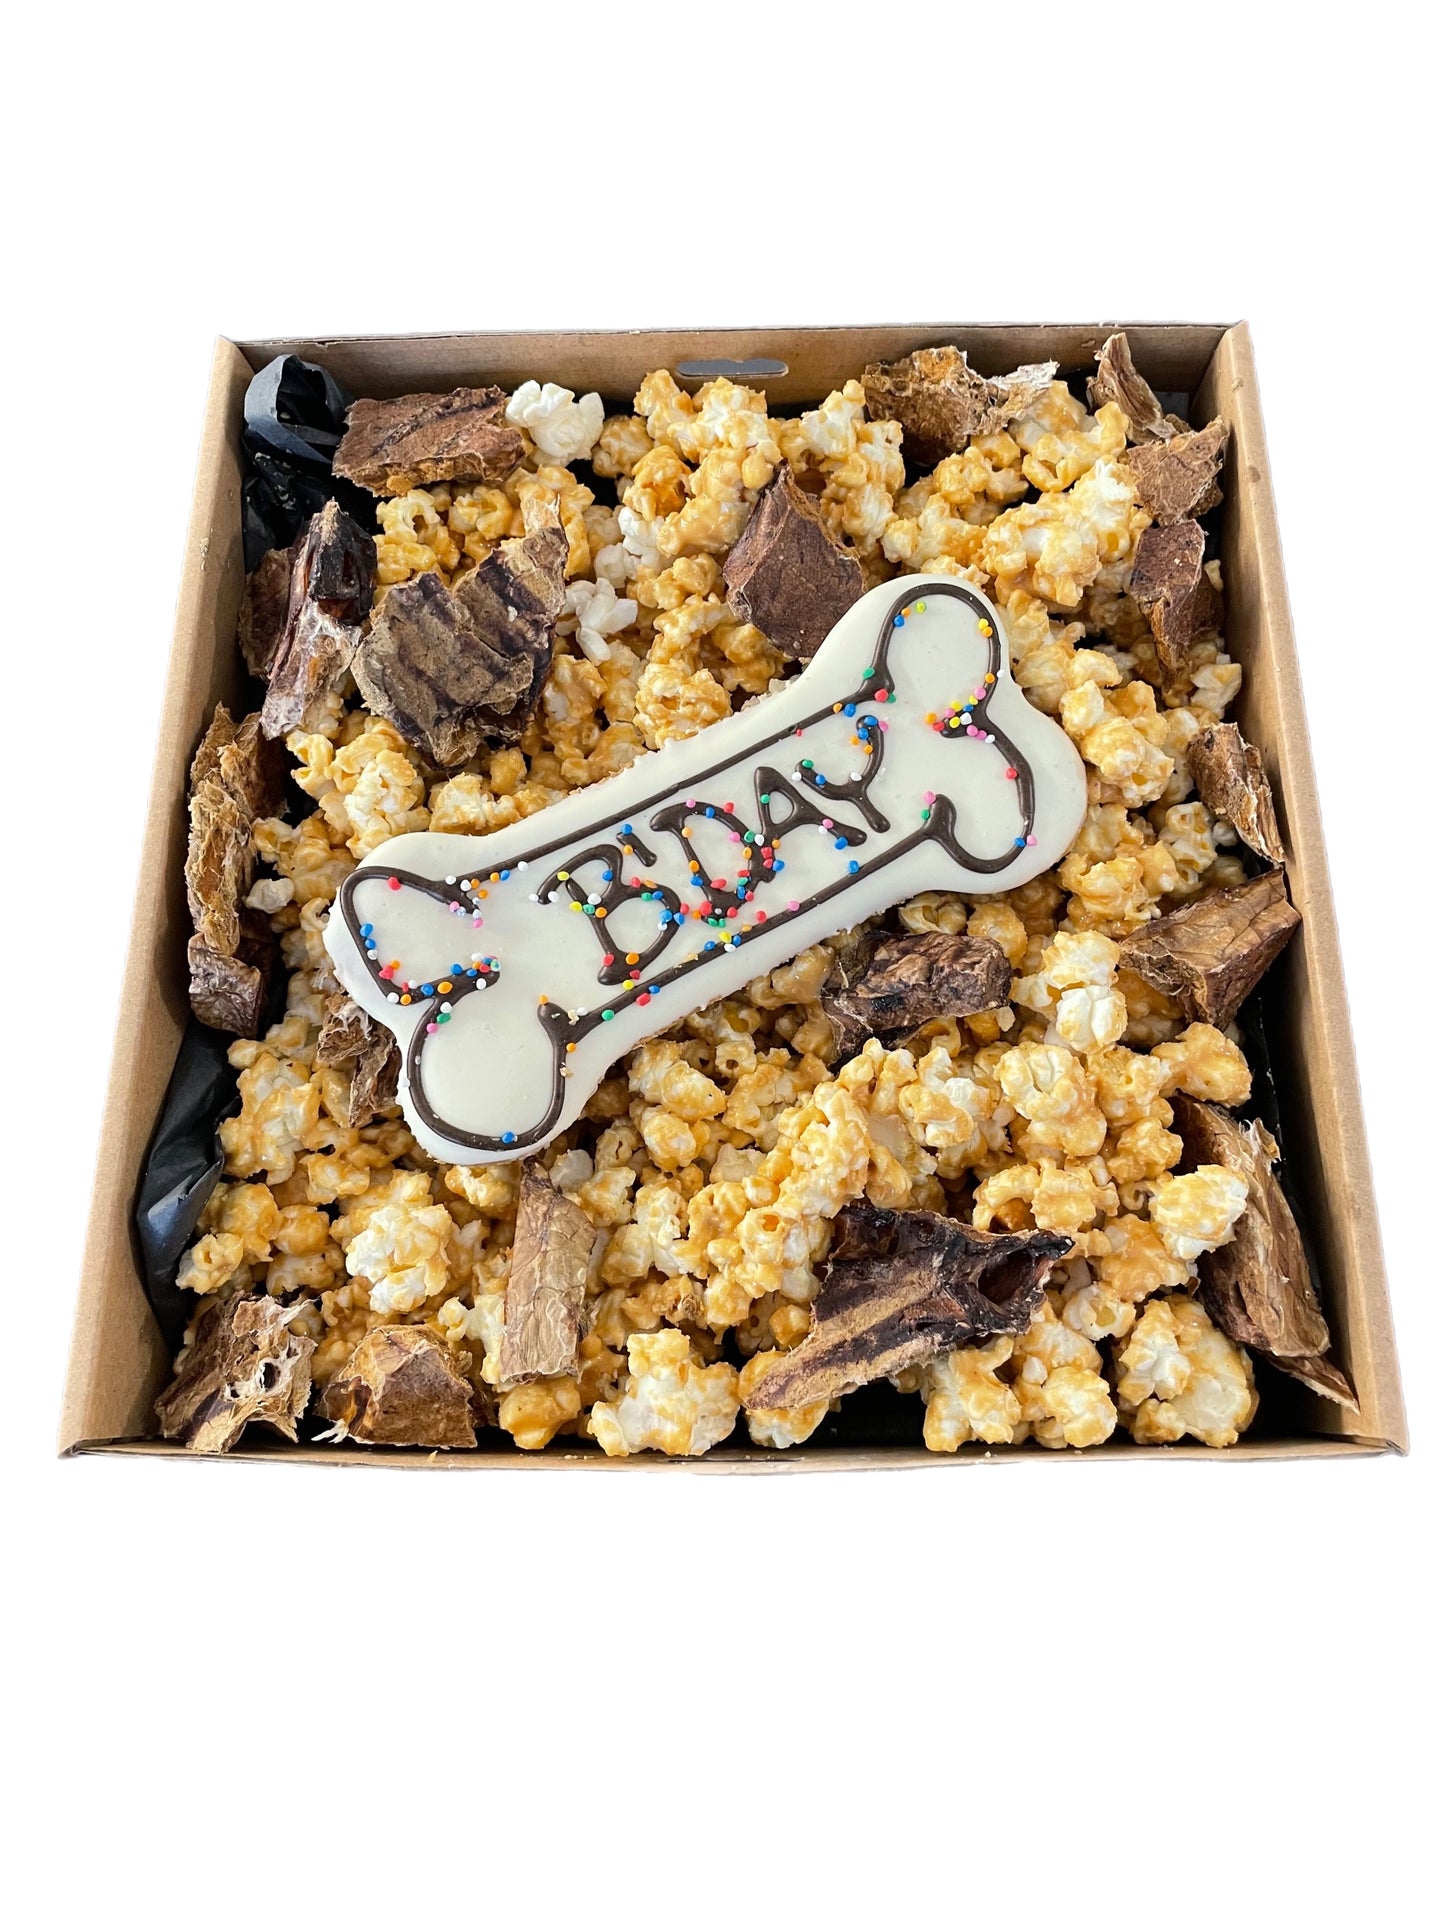 Peanut butter smothered popcorn with dried treats gift pack sugar free